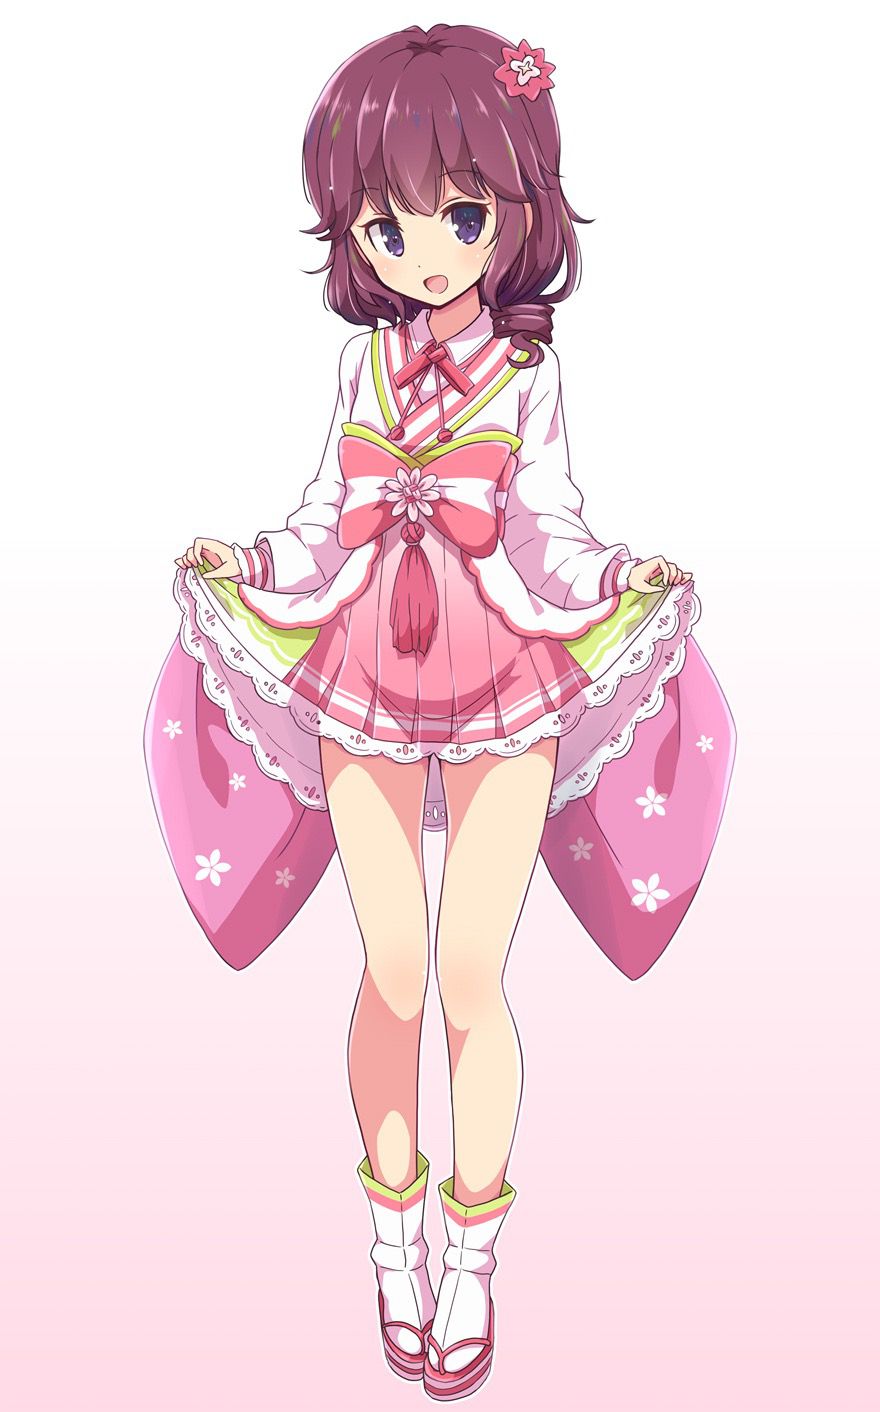 The most cute character in machikado mazou, wwwwwwww which is finally decided 7